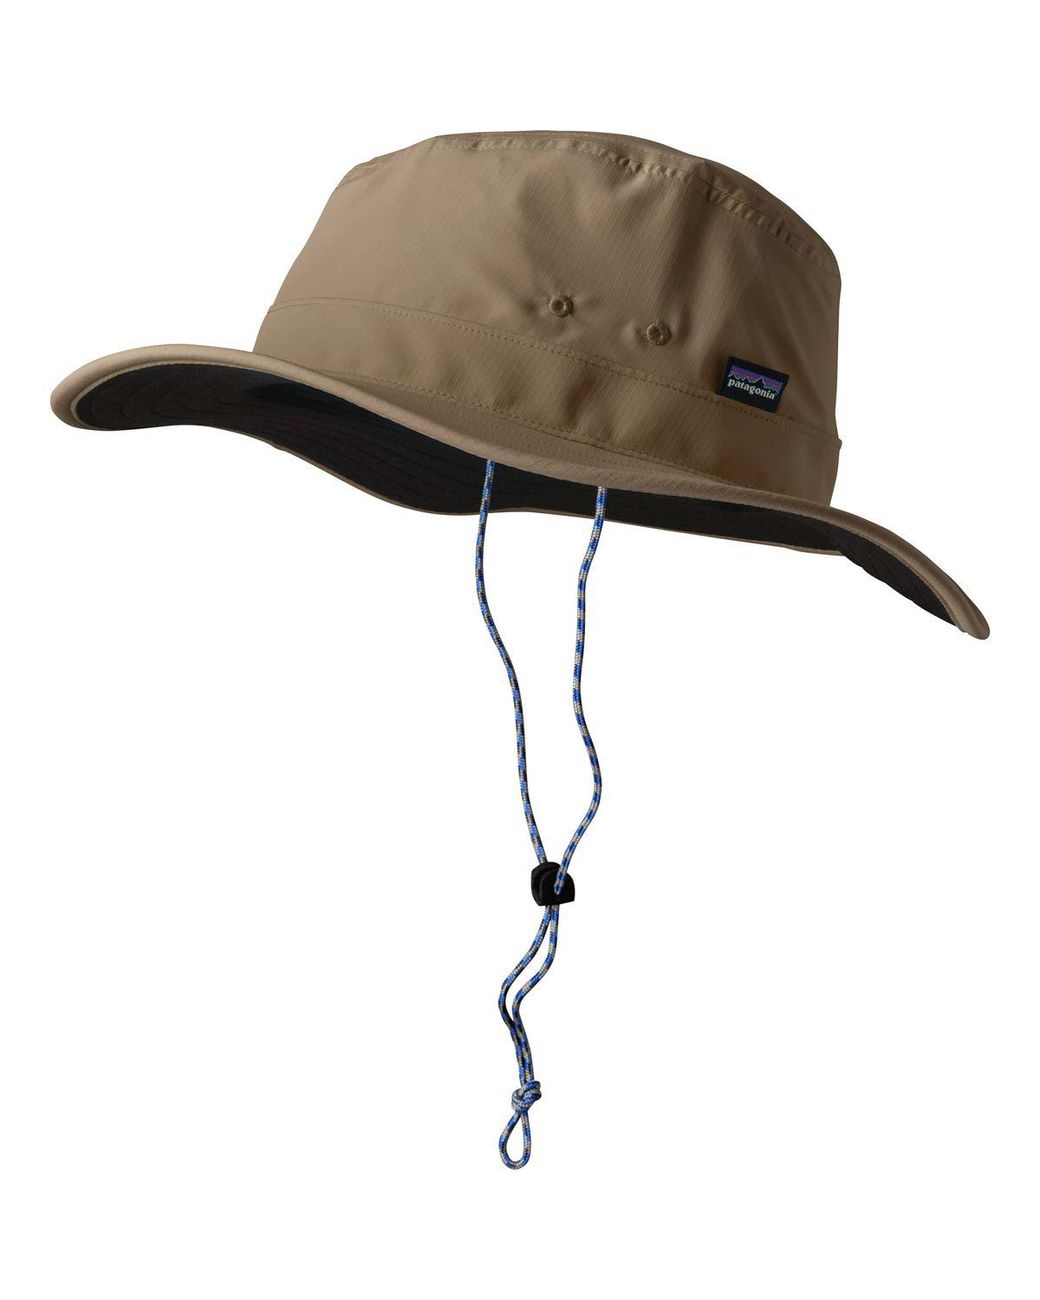 Patagonia Tech Sun Booney Hat in Natural for Men